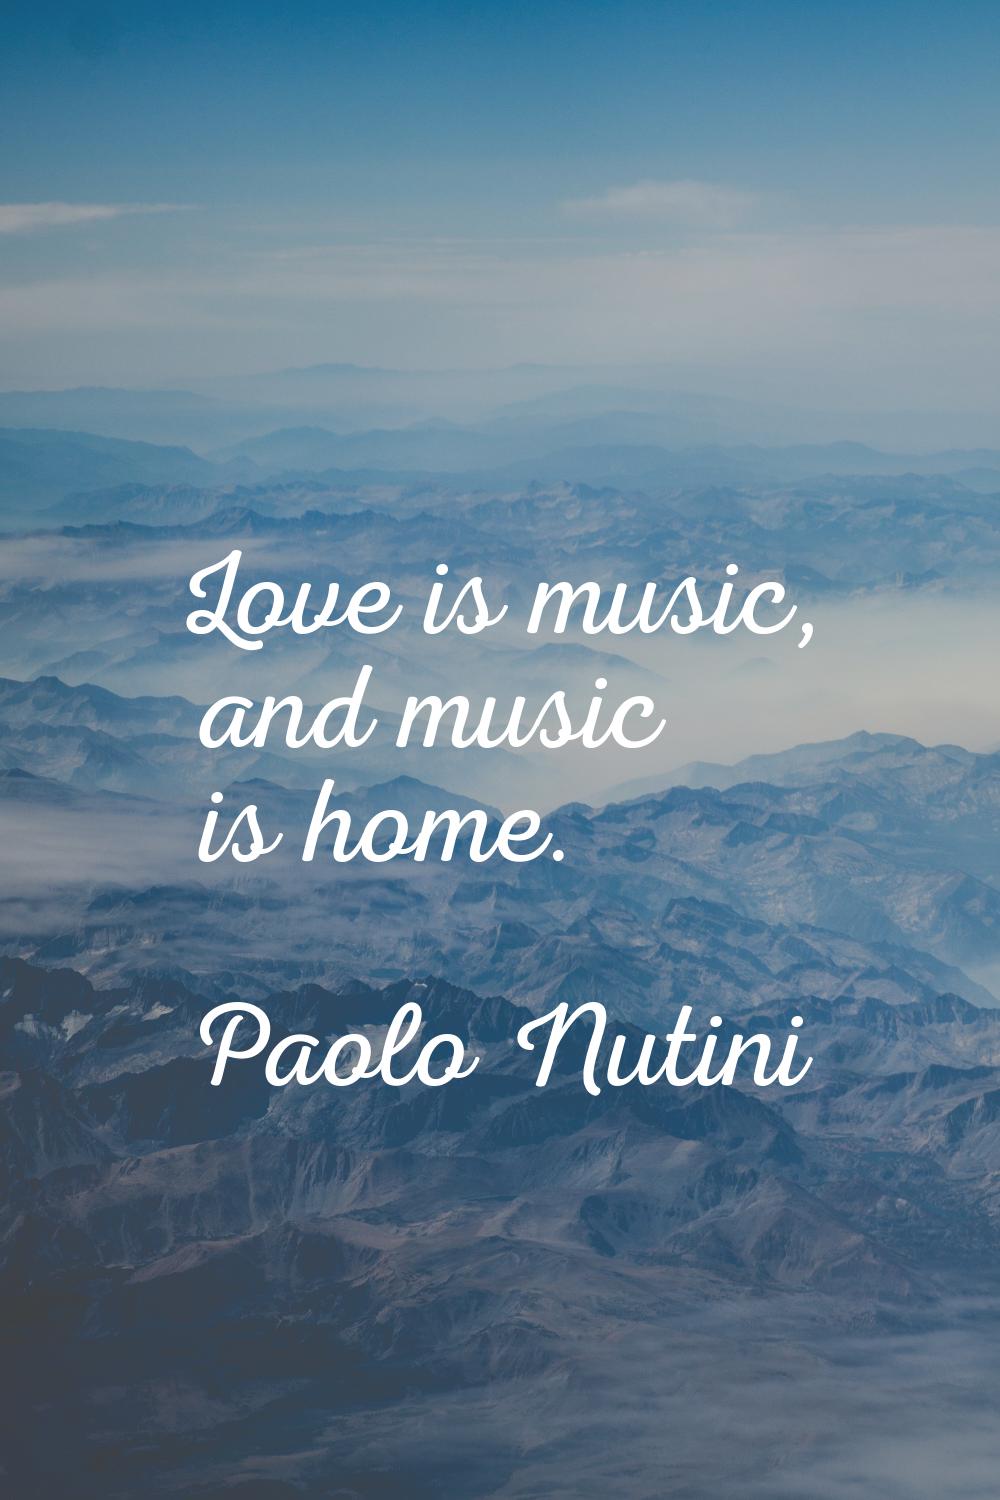 Love is music, and music is home.